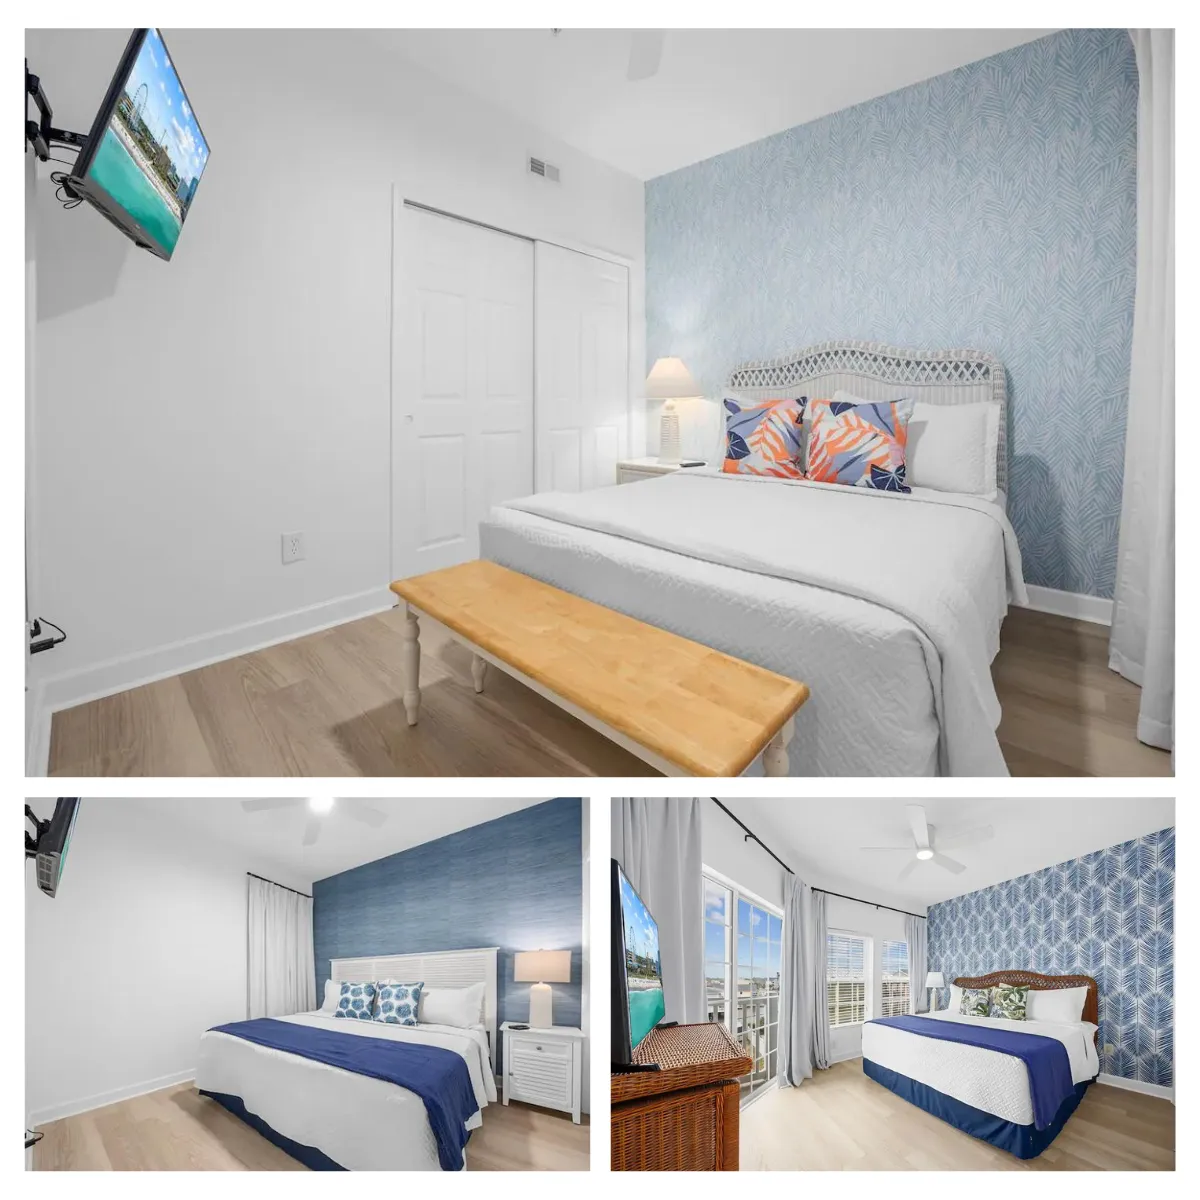 Experience the comfort of Cast-A-Waves' bedrooms, featuring luxurious linens, flat screen TVs, and ample storage space on both floors.